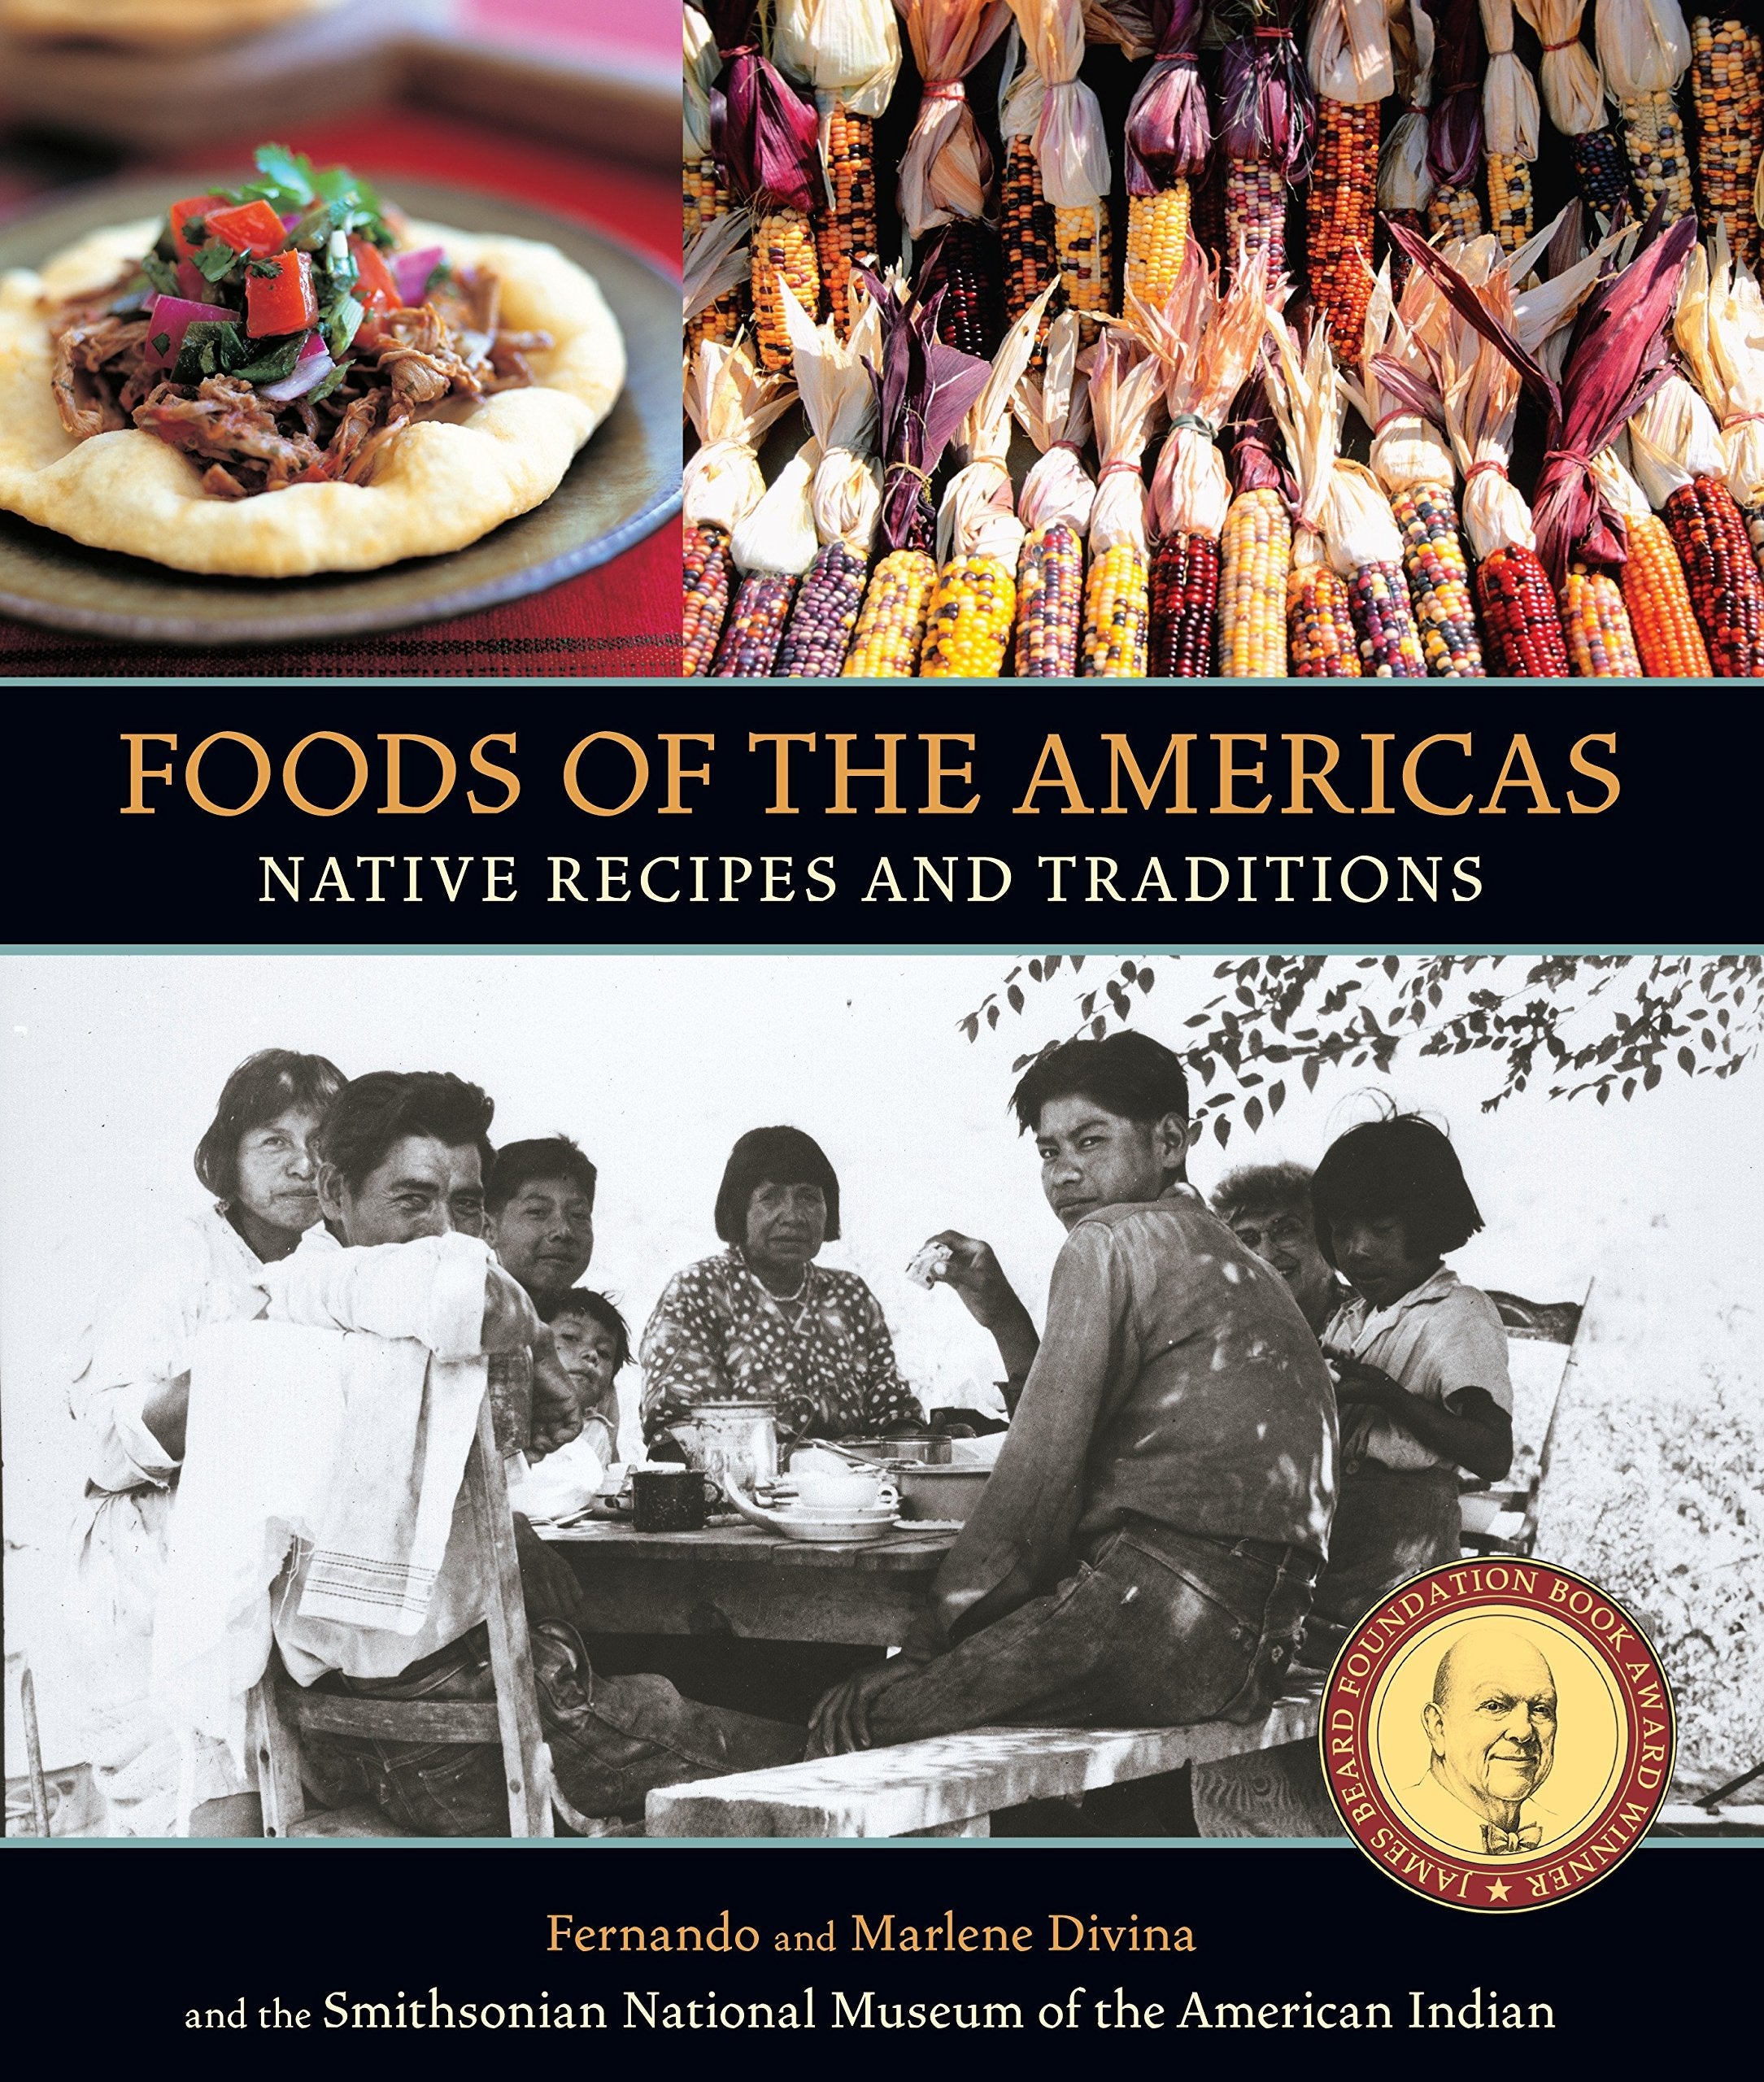 Foods of the Americas: Native Recipes and Traditions (Fernando Divina and Marlene Divina)